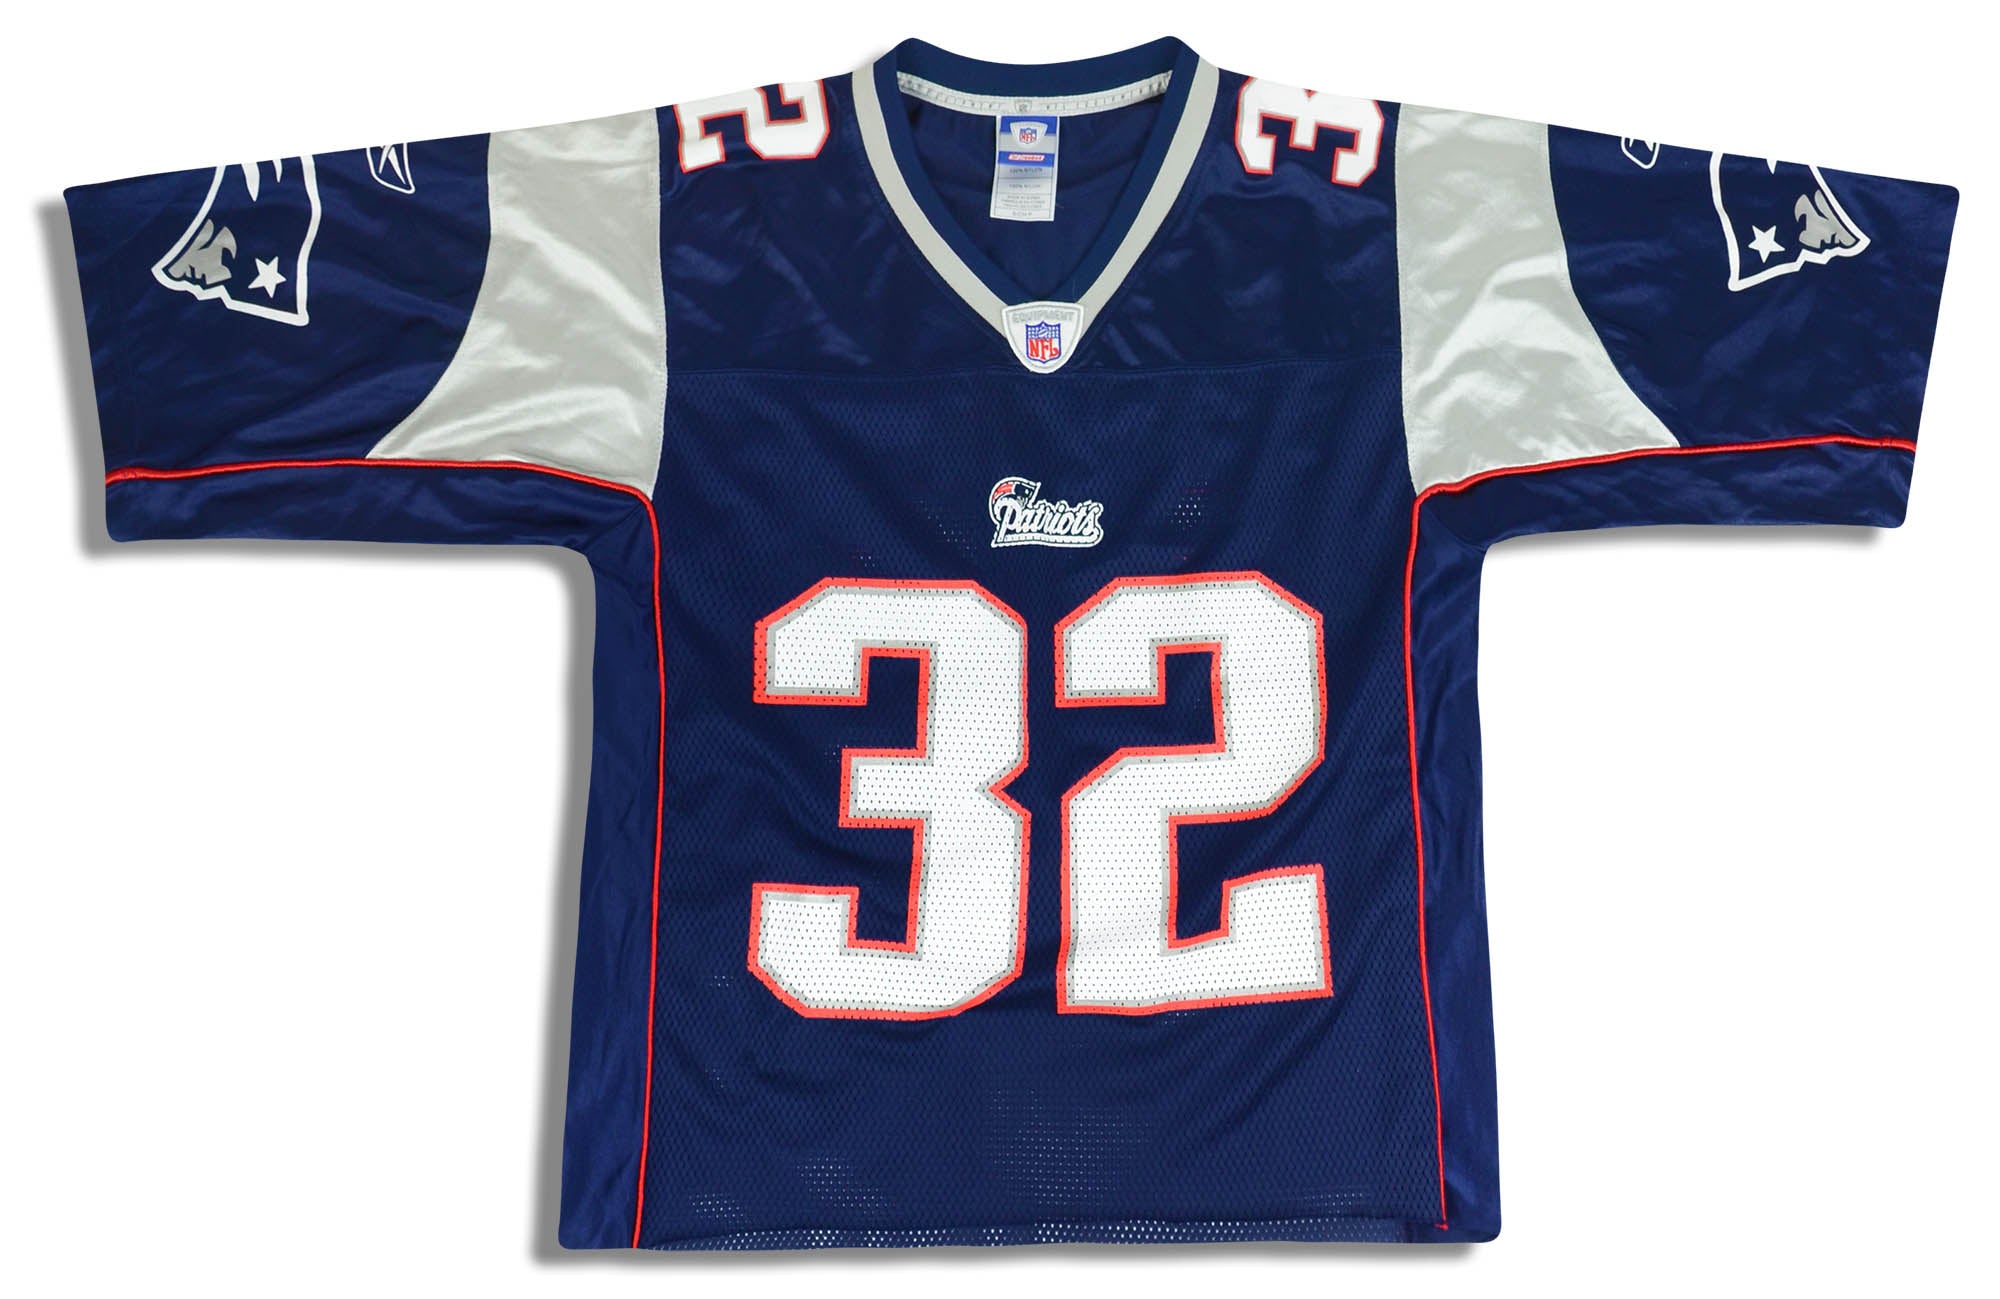 2002-03 NEW ENGLAND PATRIOTS A. SMITH #32 REEBOK ON FIELD JERSEY (HOME) S